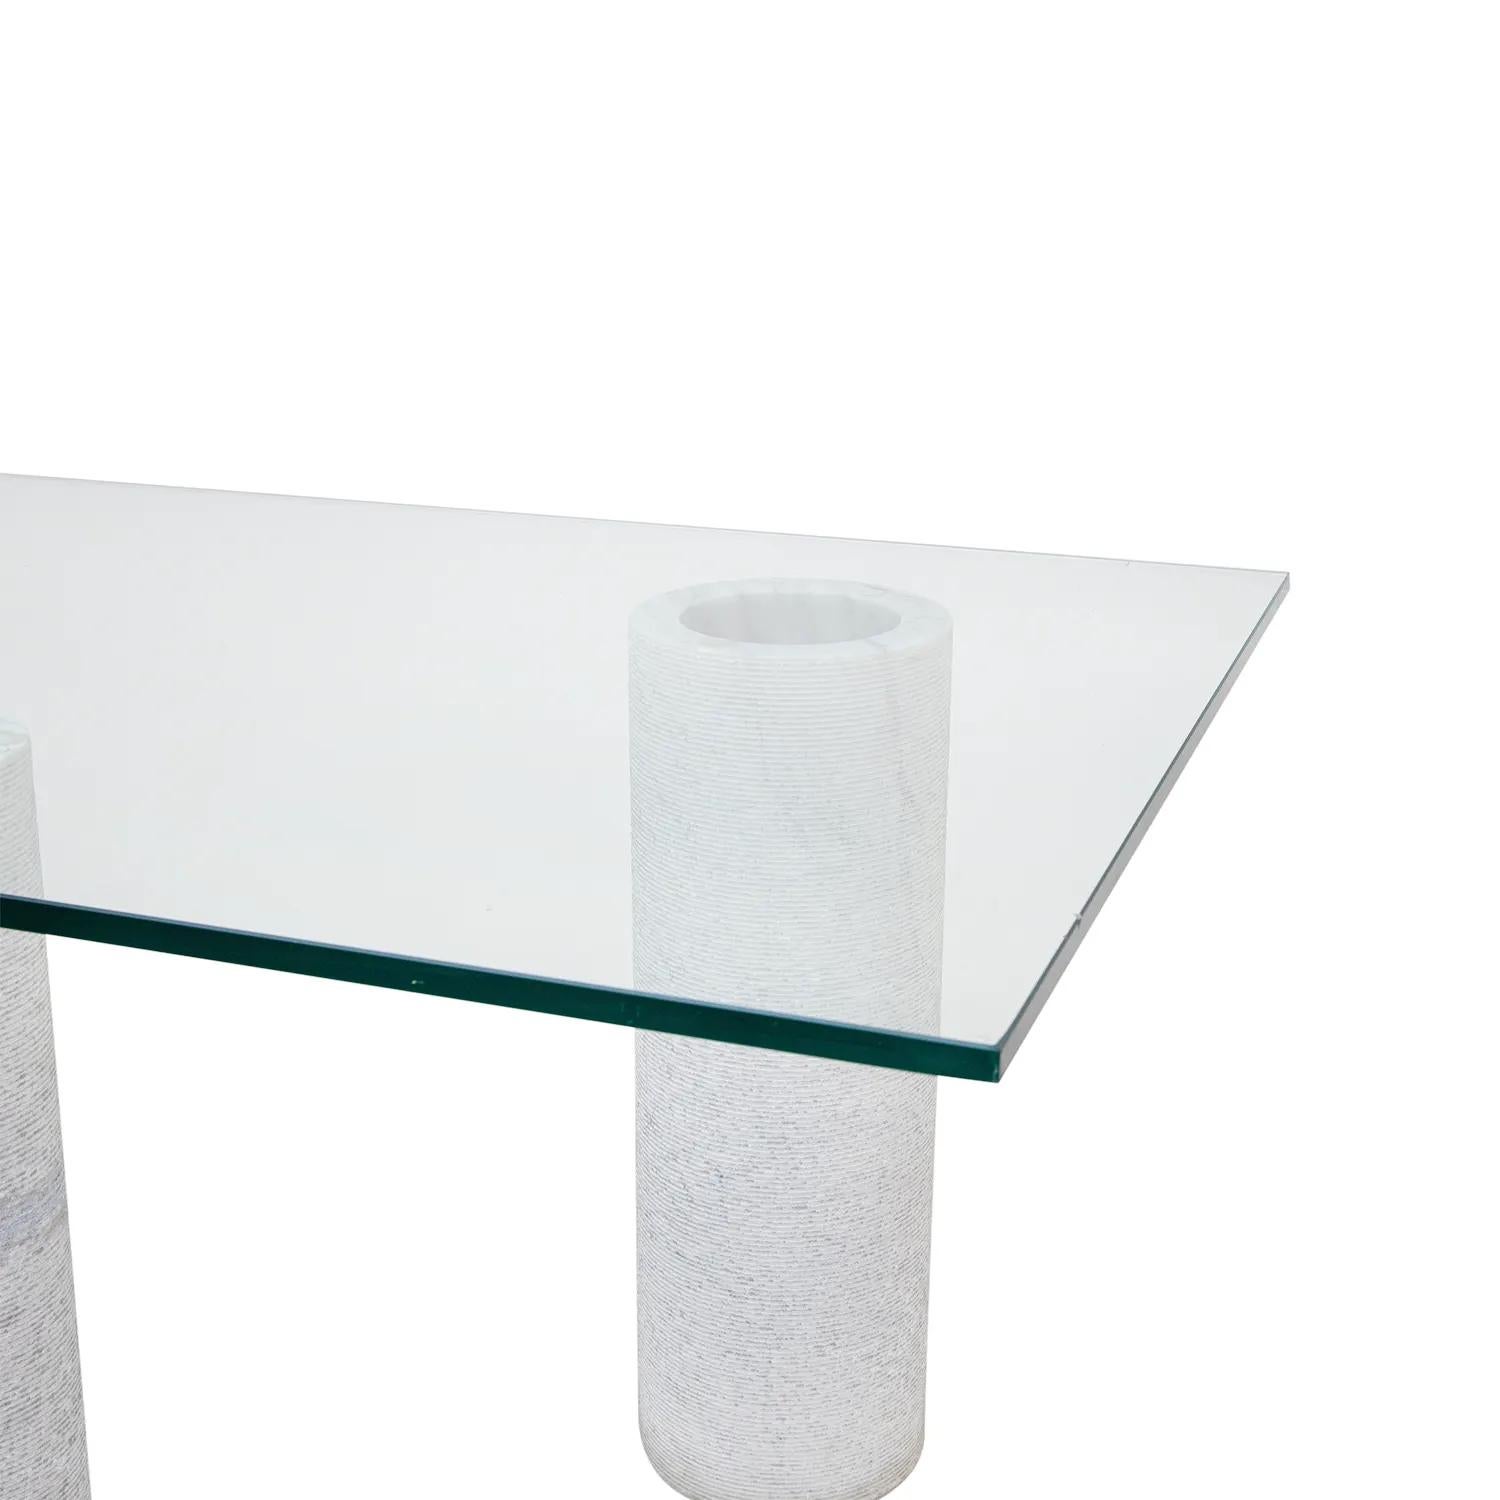 20th Century White Italian Marble, Glass Dining Room Table by Massimo Vignelli For Sale 7